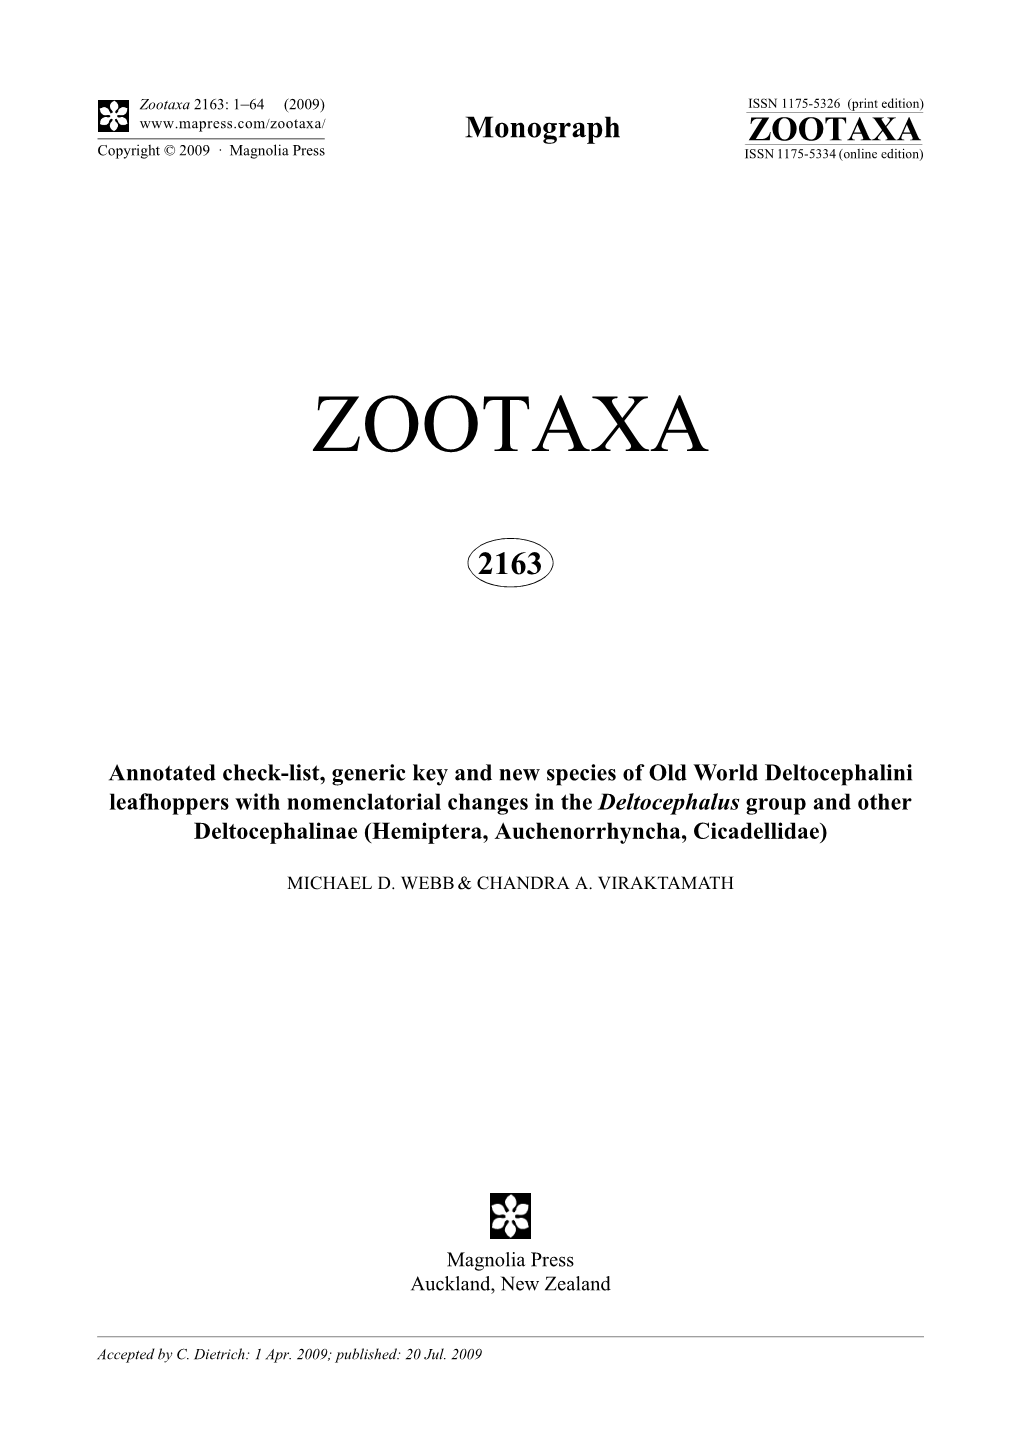 Zootaxa, Annotated Check-List, Generic Key and New